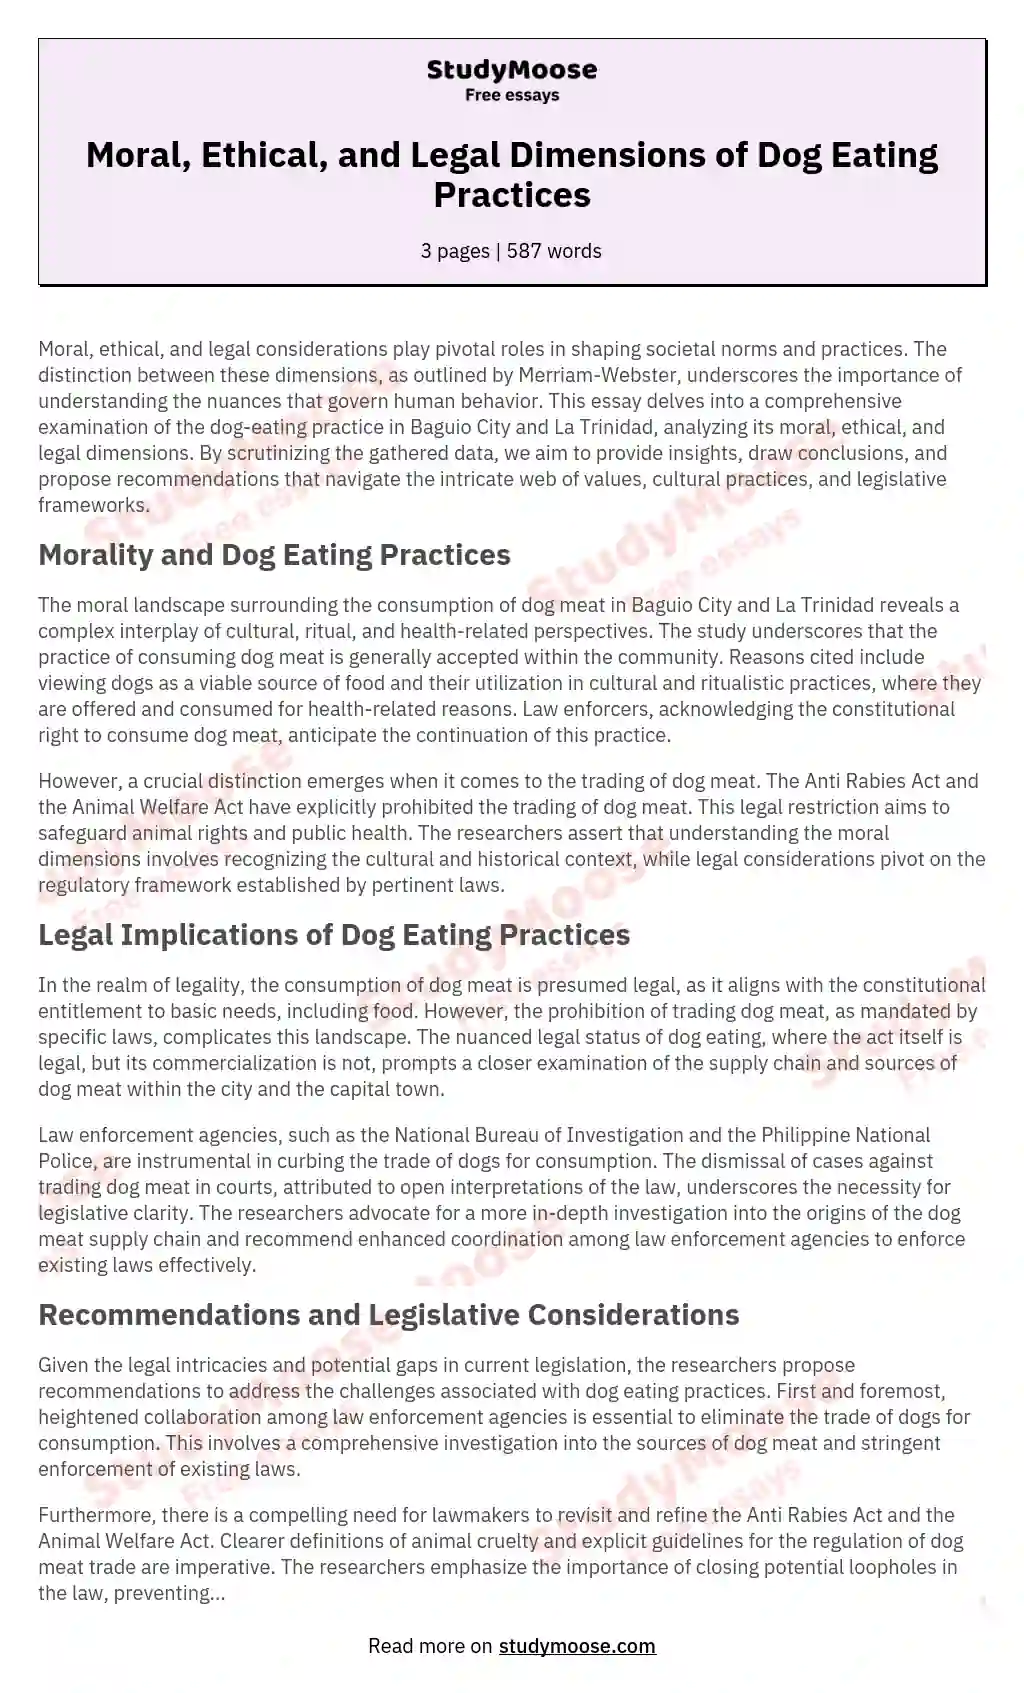 Moral, Ethical, and Legal Dimensions of Dog Eating Practices essay